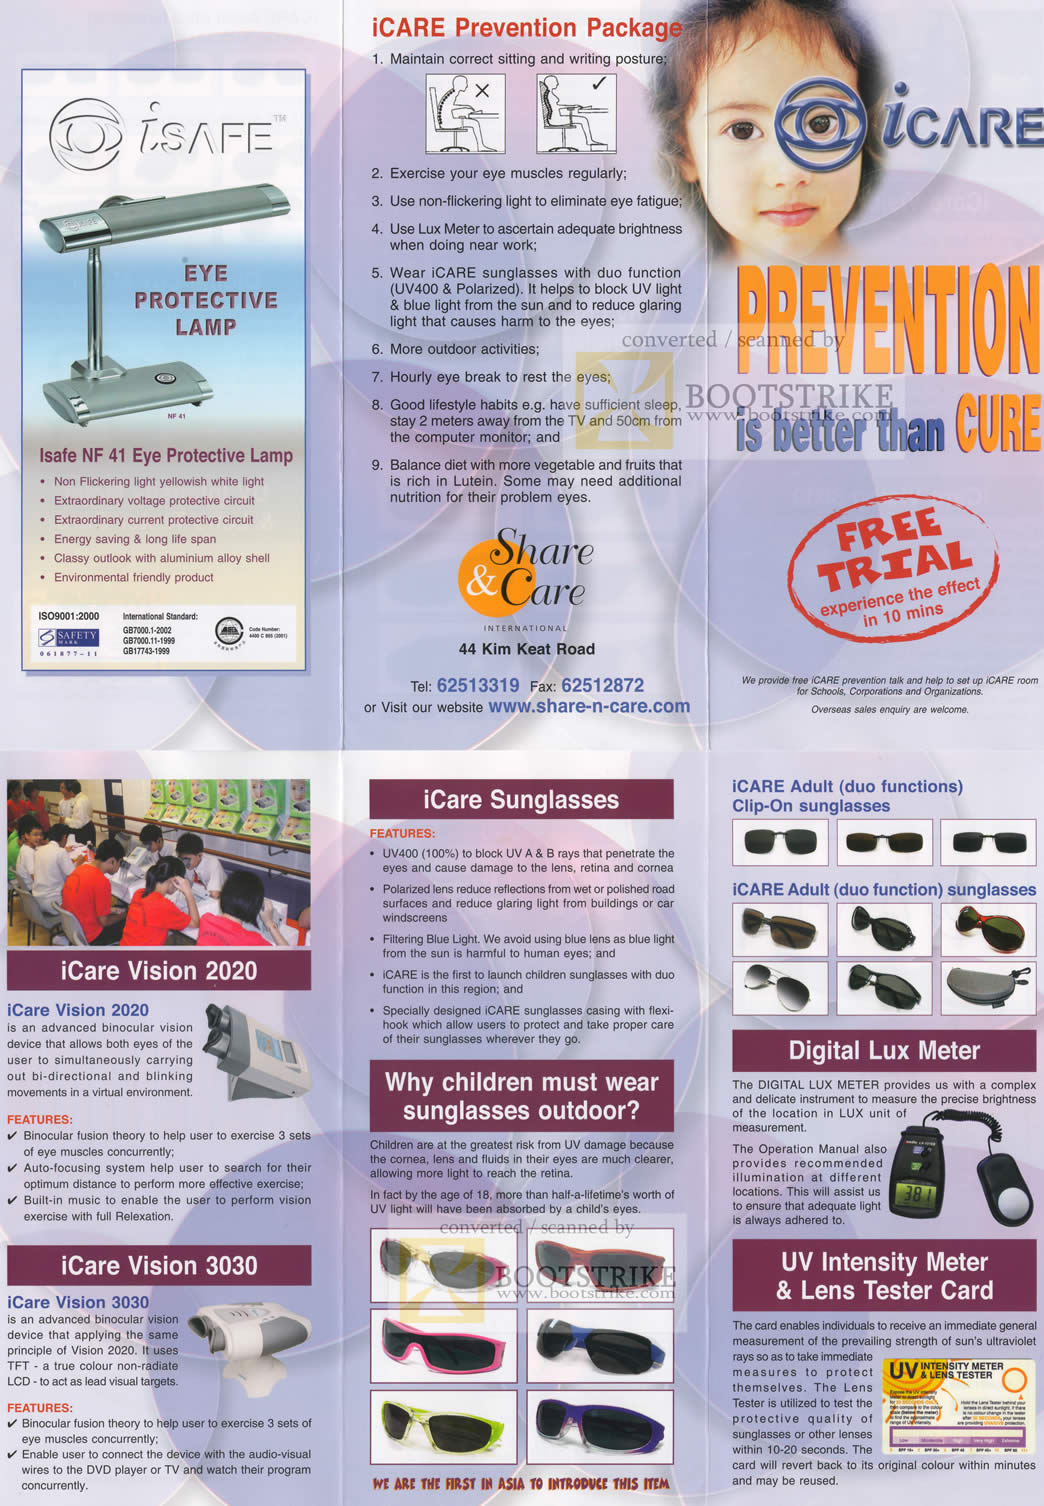 Sitex 2009 price list image brochure of Share N Care ISafe Eye Protective Lamp ICare Sunglasses Vision 2020 3030